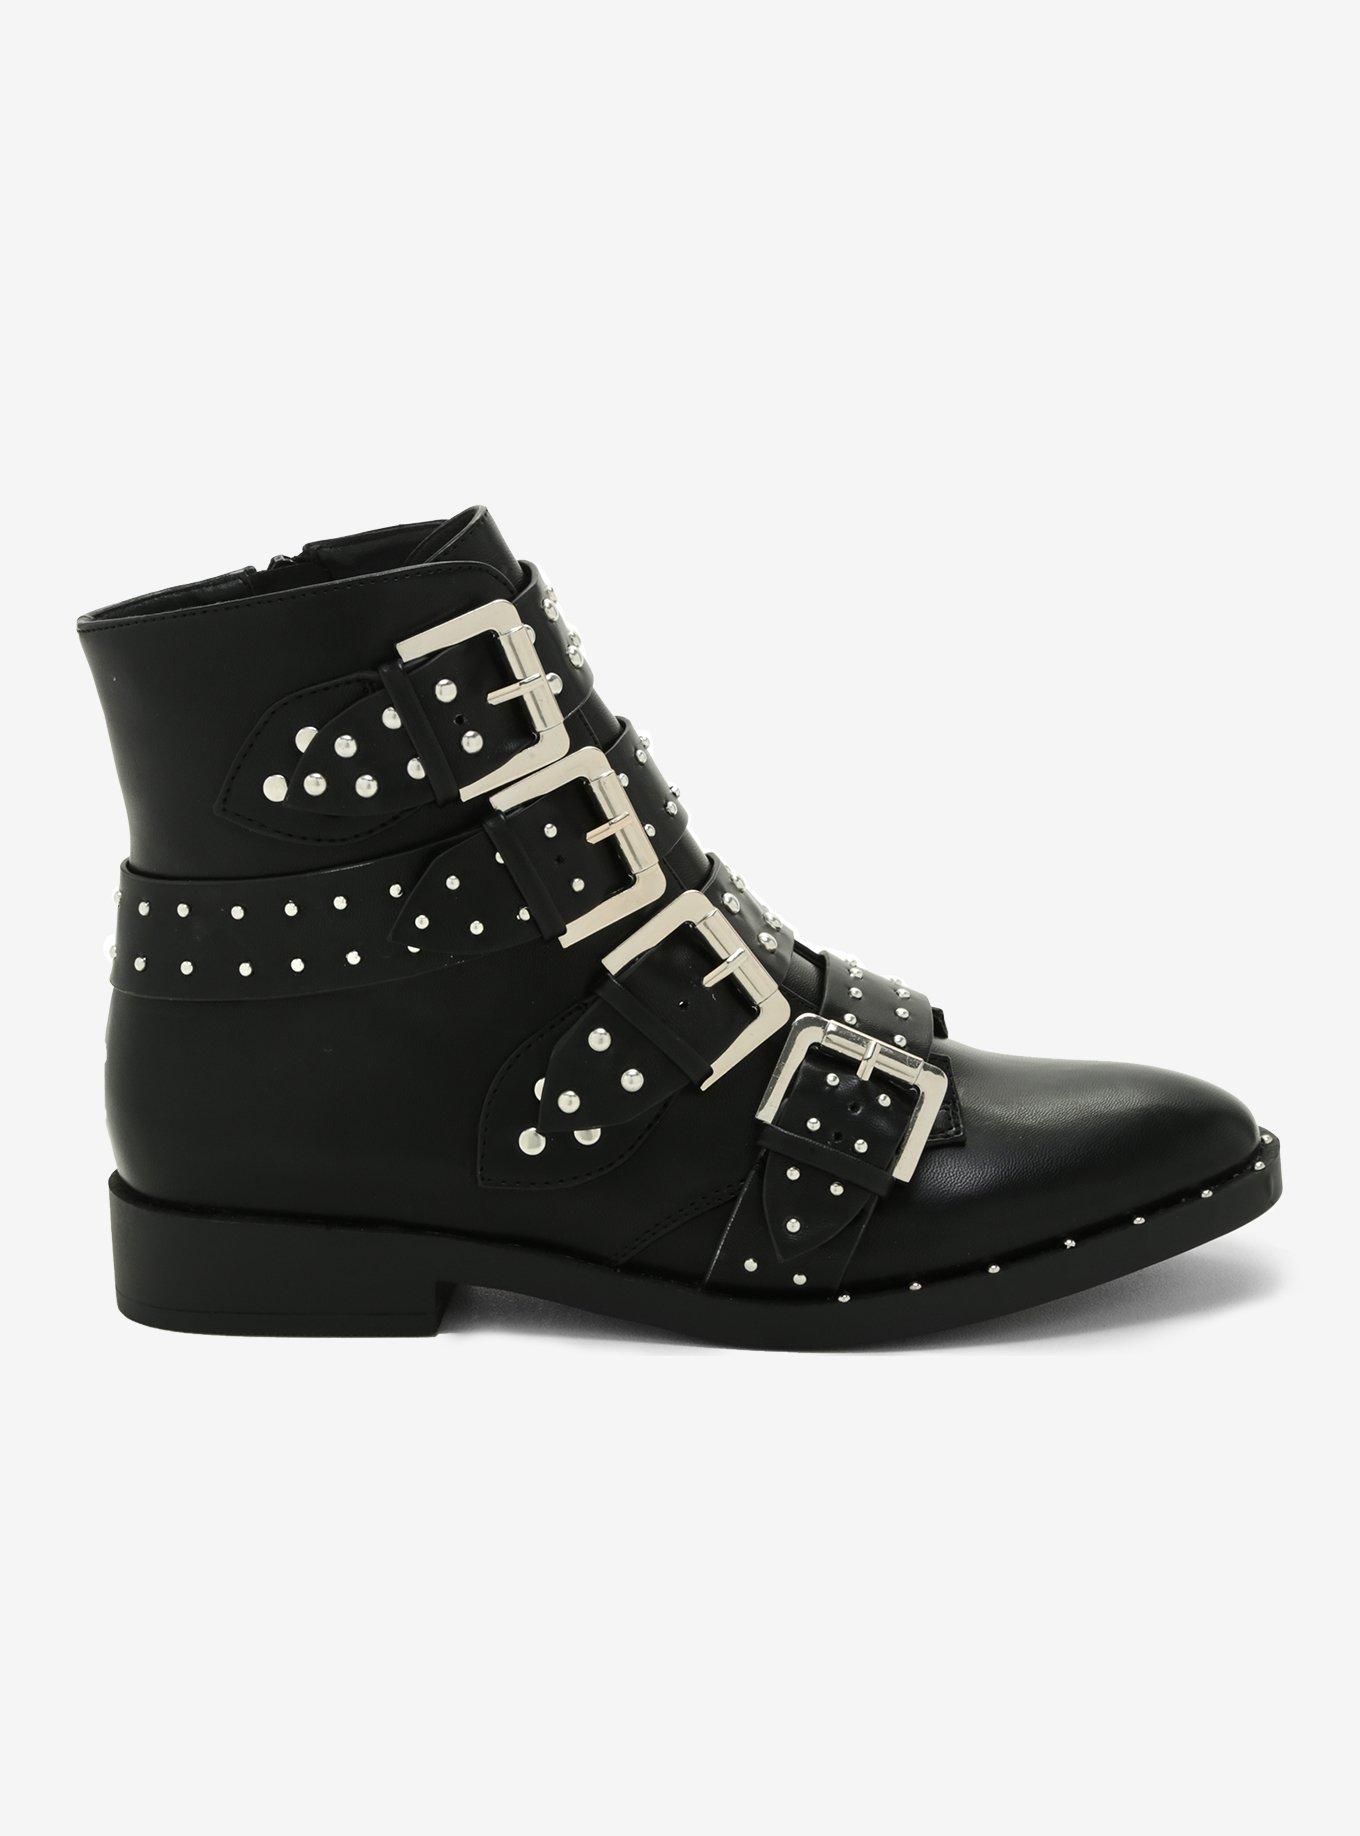 Studded Four Strap Buckle Boots, BLACK, alternate